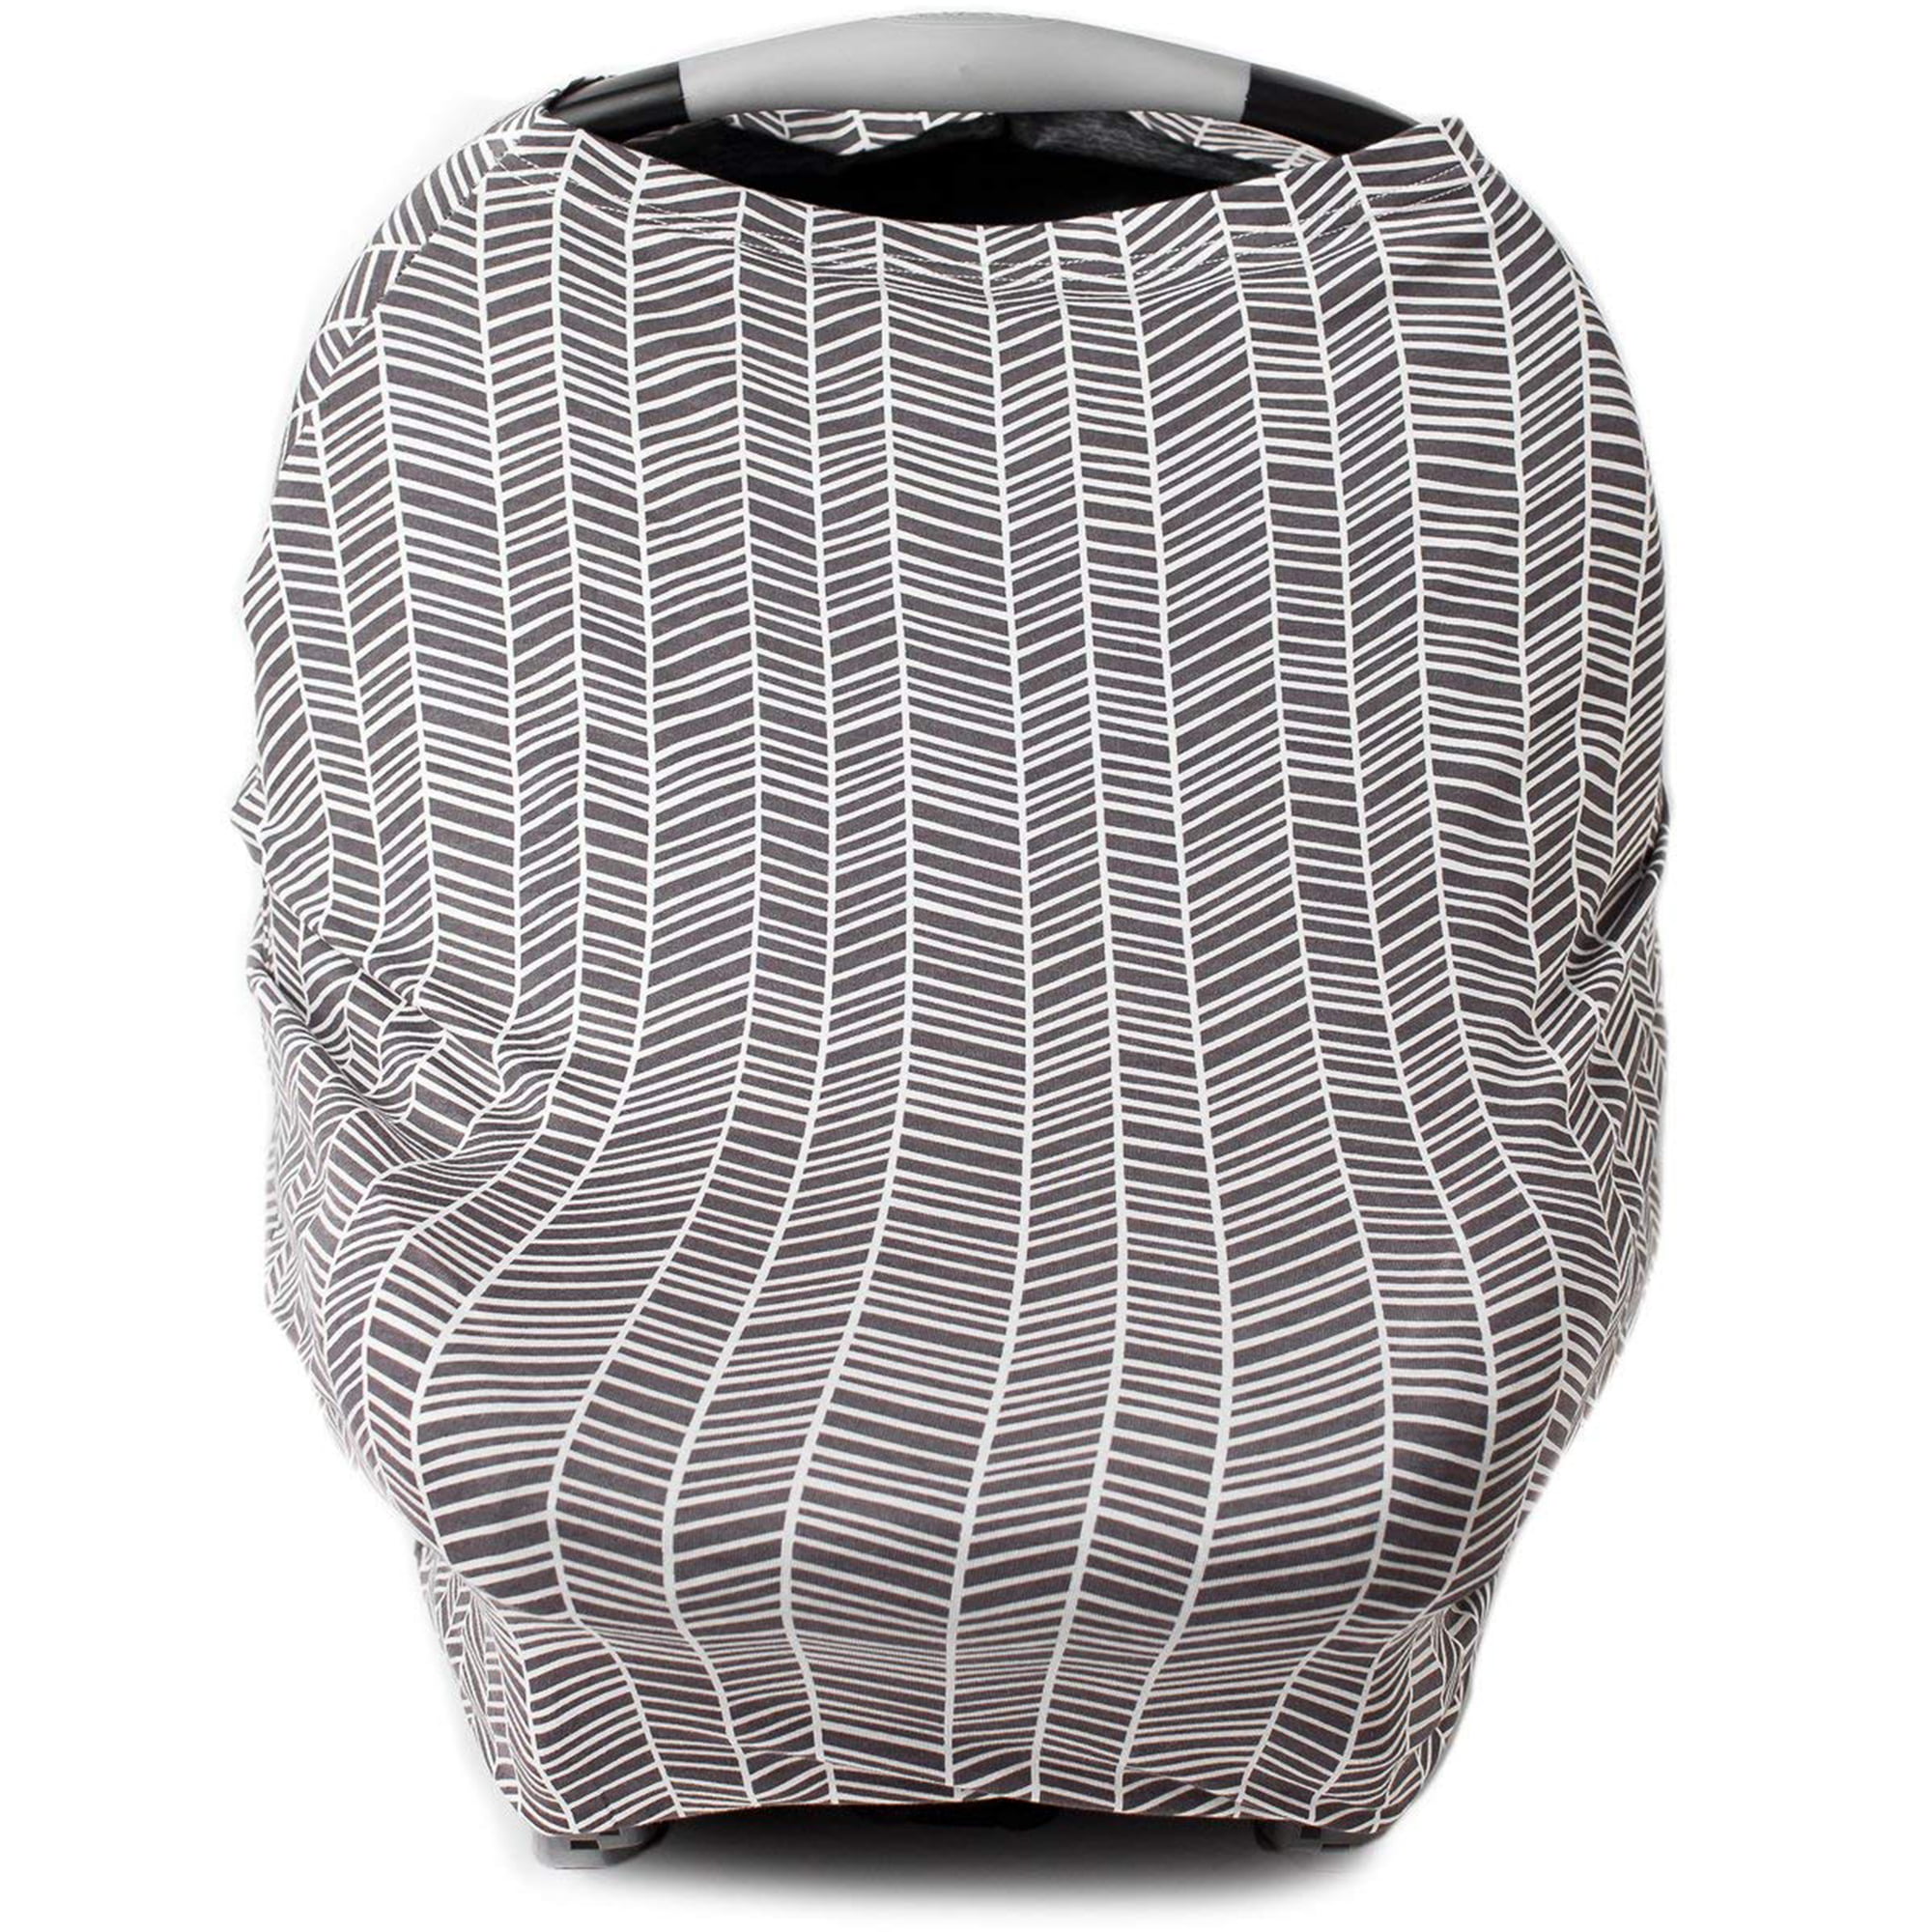 Geometric Bon Appetit Grey Baby Shower Gift for Boys and Girls Full Coverage Nursing Cover and Infant Car Seat Canopy with Pack-Away Pocket Black Triangles Multi Use Soft & Stretchy